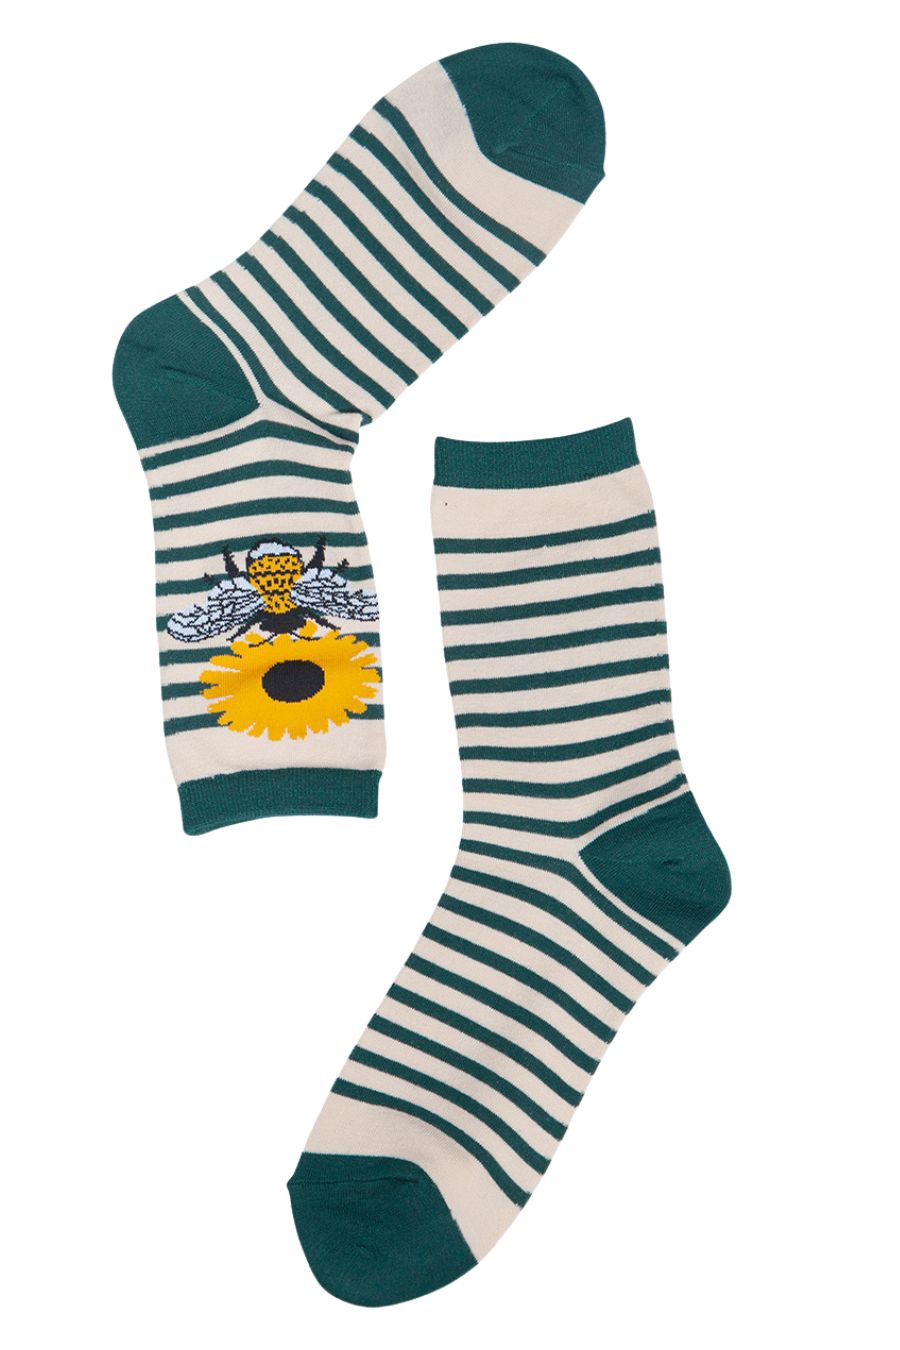 green, cream striped ankle socks with bee and sunflower